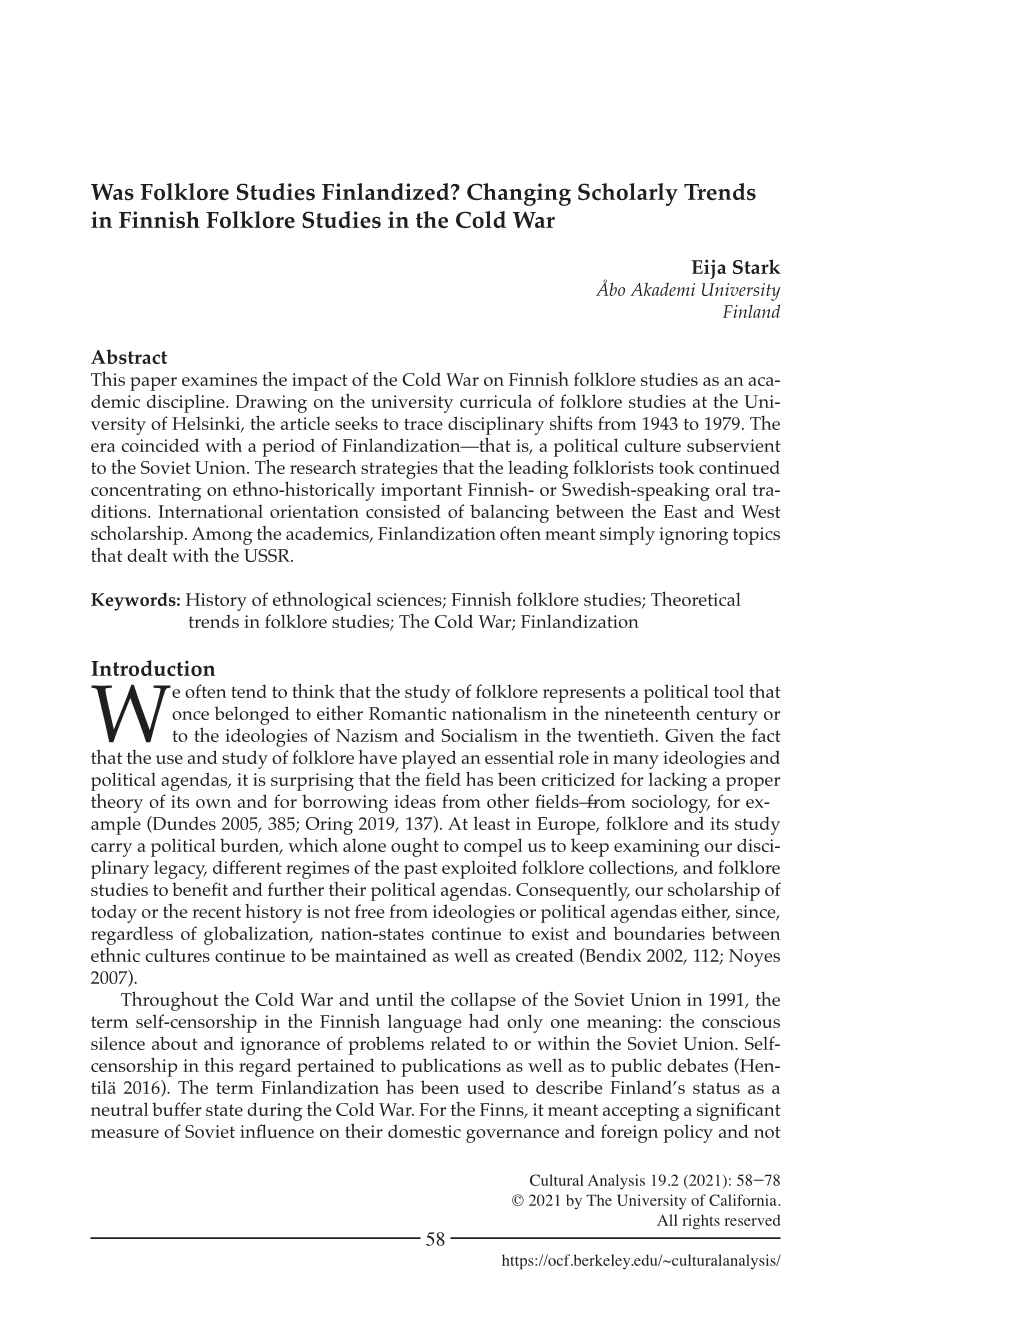 Changing Scholarly Trends in Finnish Folklore Studies in the Cold War